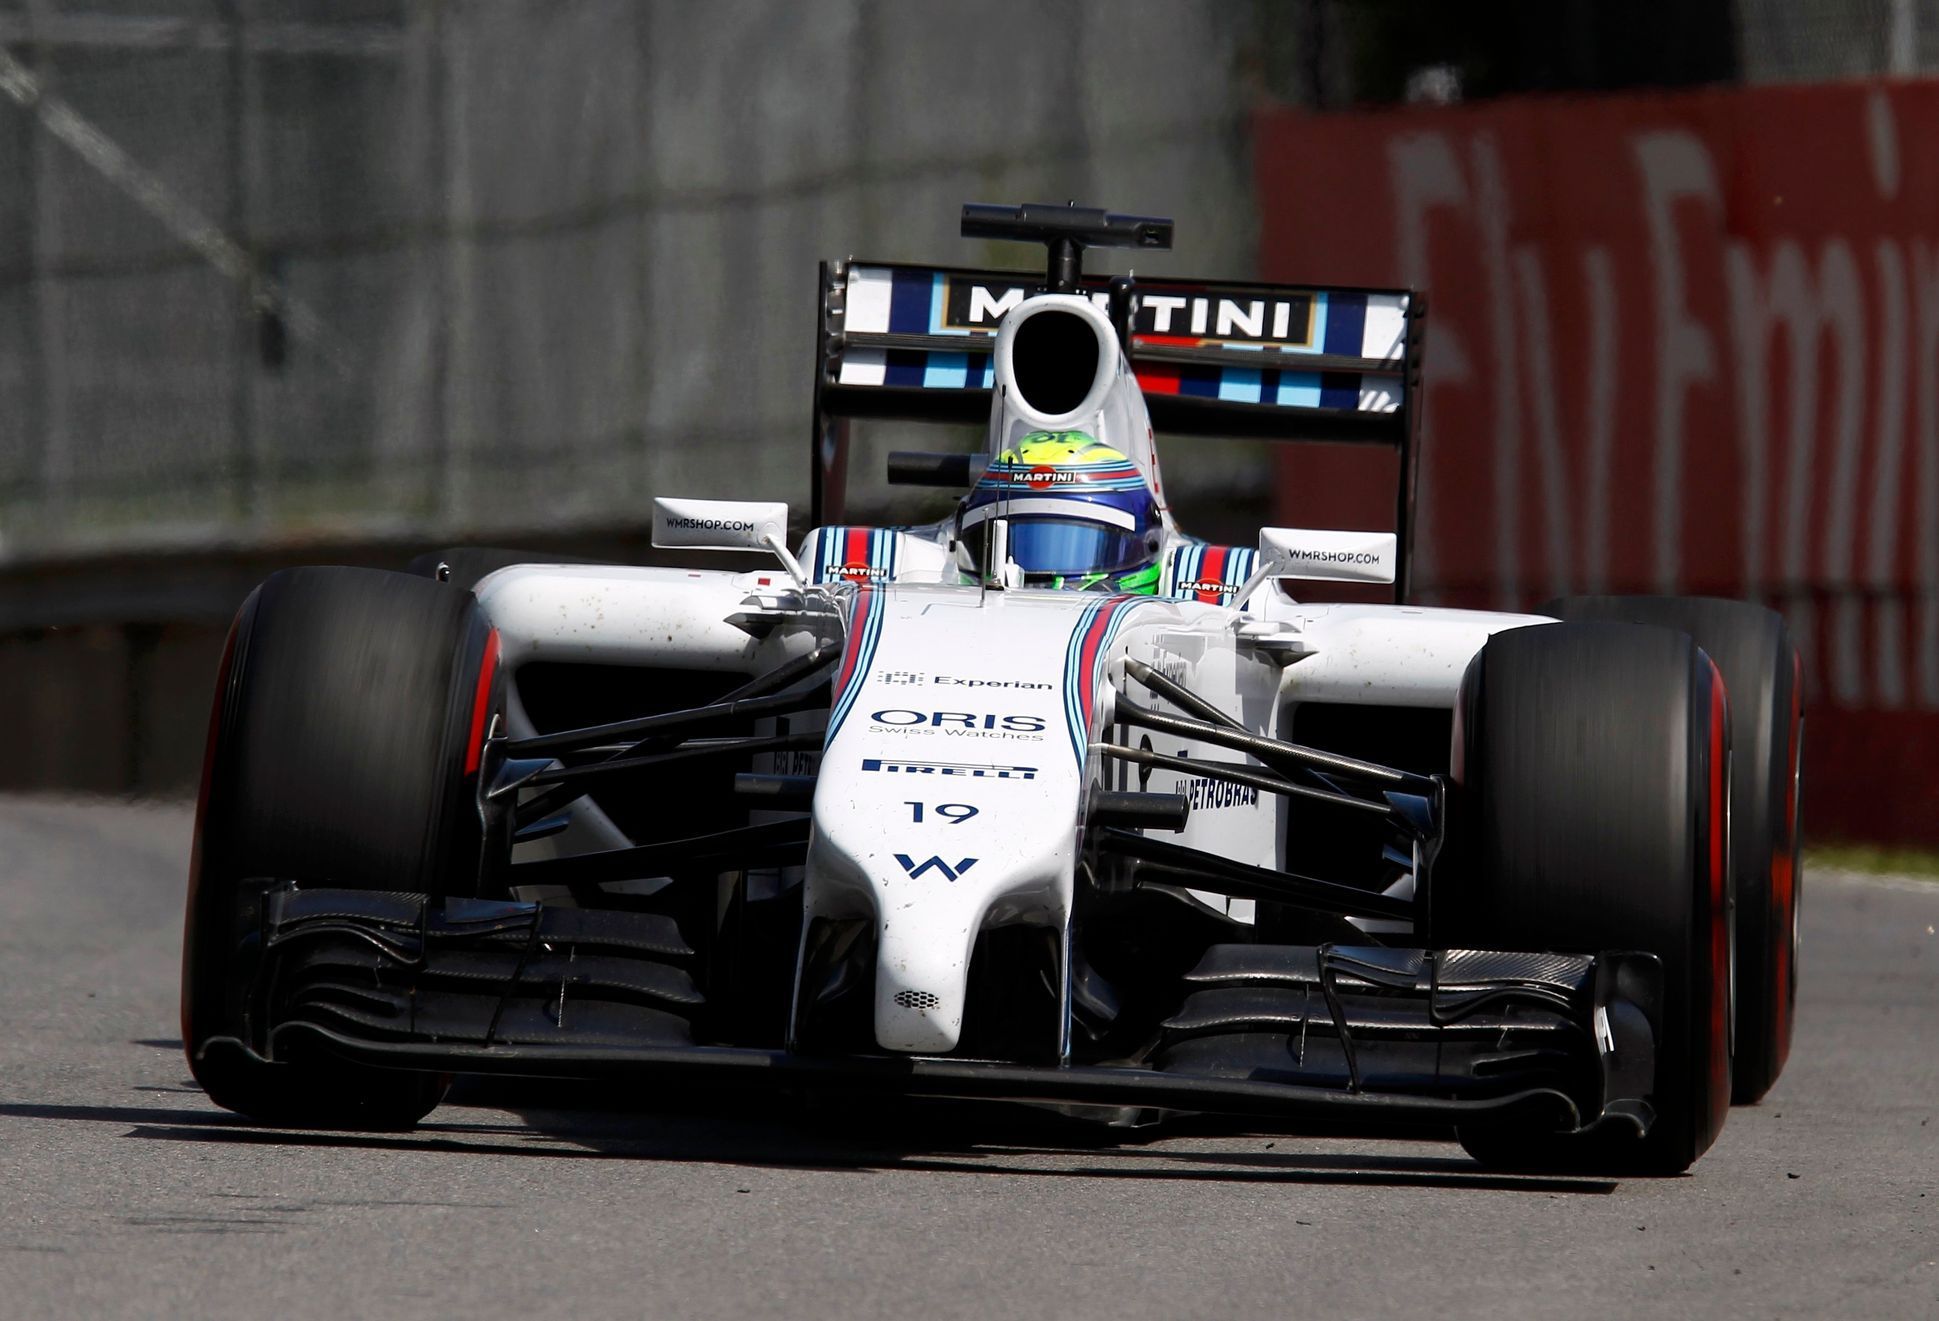 Williams Formula One driver Massa of Brazil drives during the Canadian F1 Grand Prix at the Circuit Gilles Villeneuve in Montreal